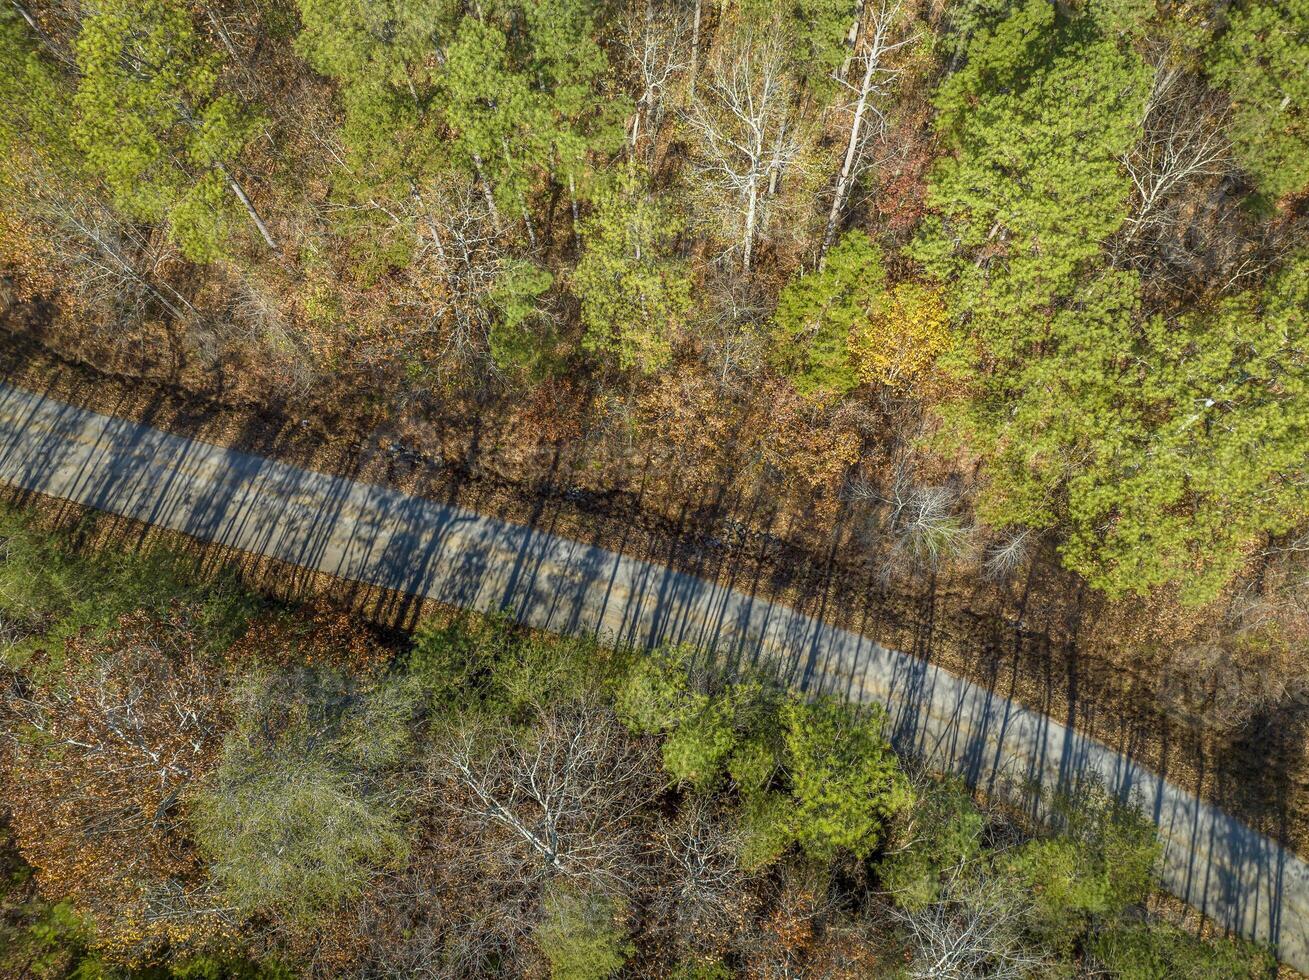 local highway through Alabama forest along the Tenessee River, Riverton Rose Trail, late November aerial view photo